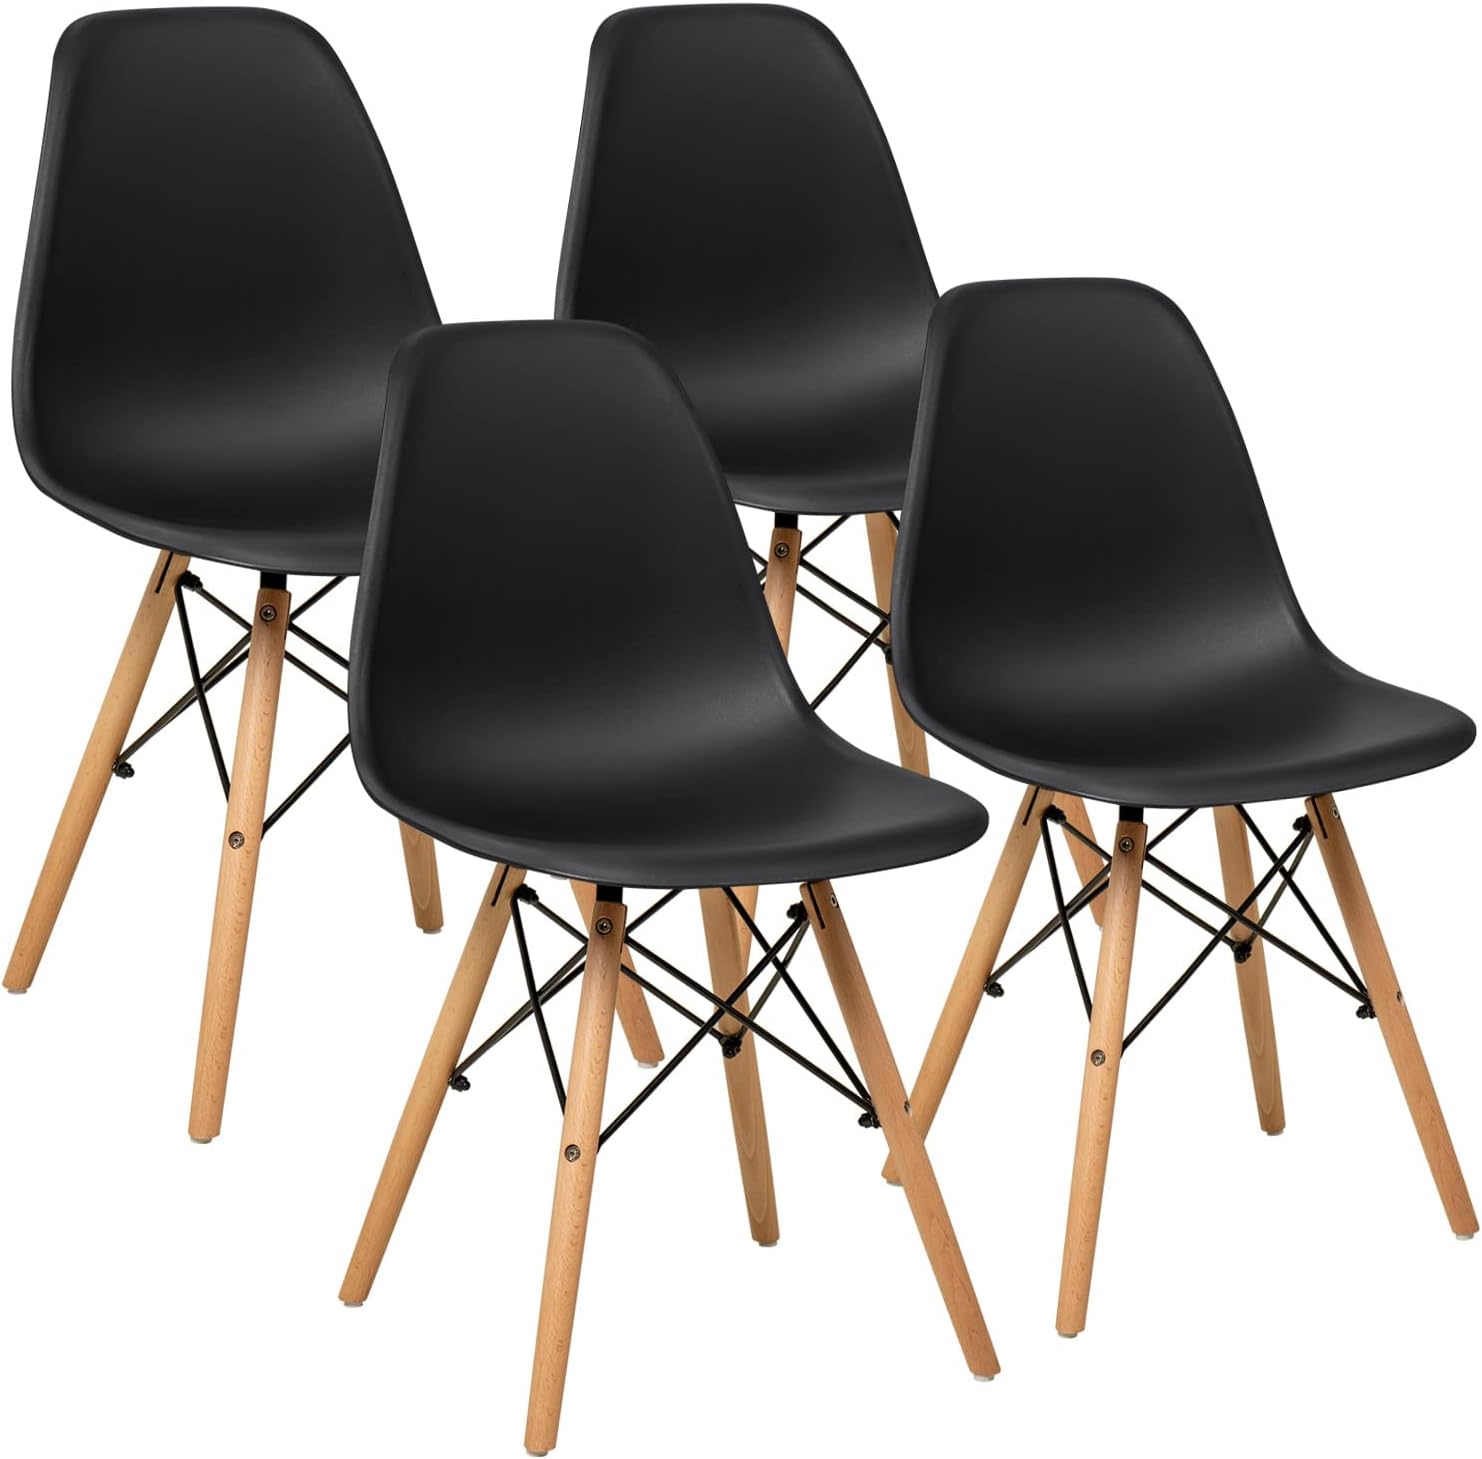 Pre Assembled Dining Room Chair Set of 4, Mid-Century Side Chairs DSW Shell Plastic Chair, Kitchen, Dining, Living Room, Outdoor Lounge (Black)